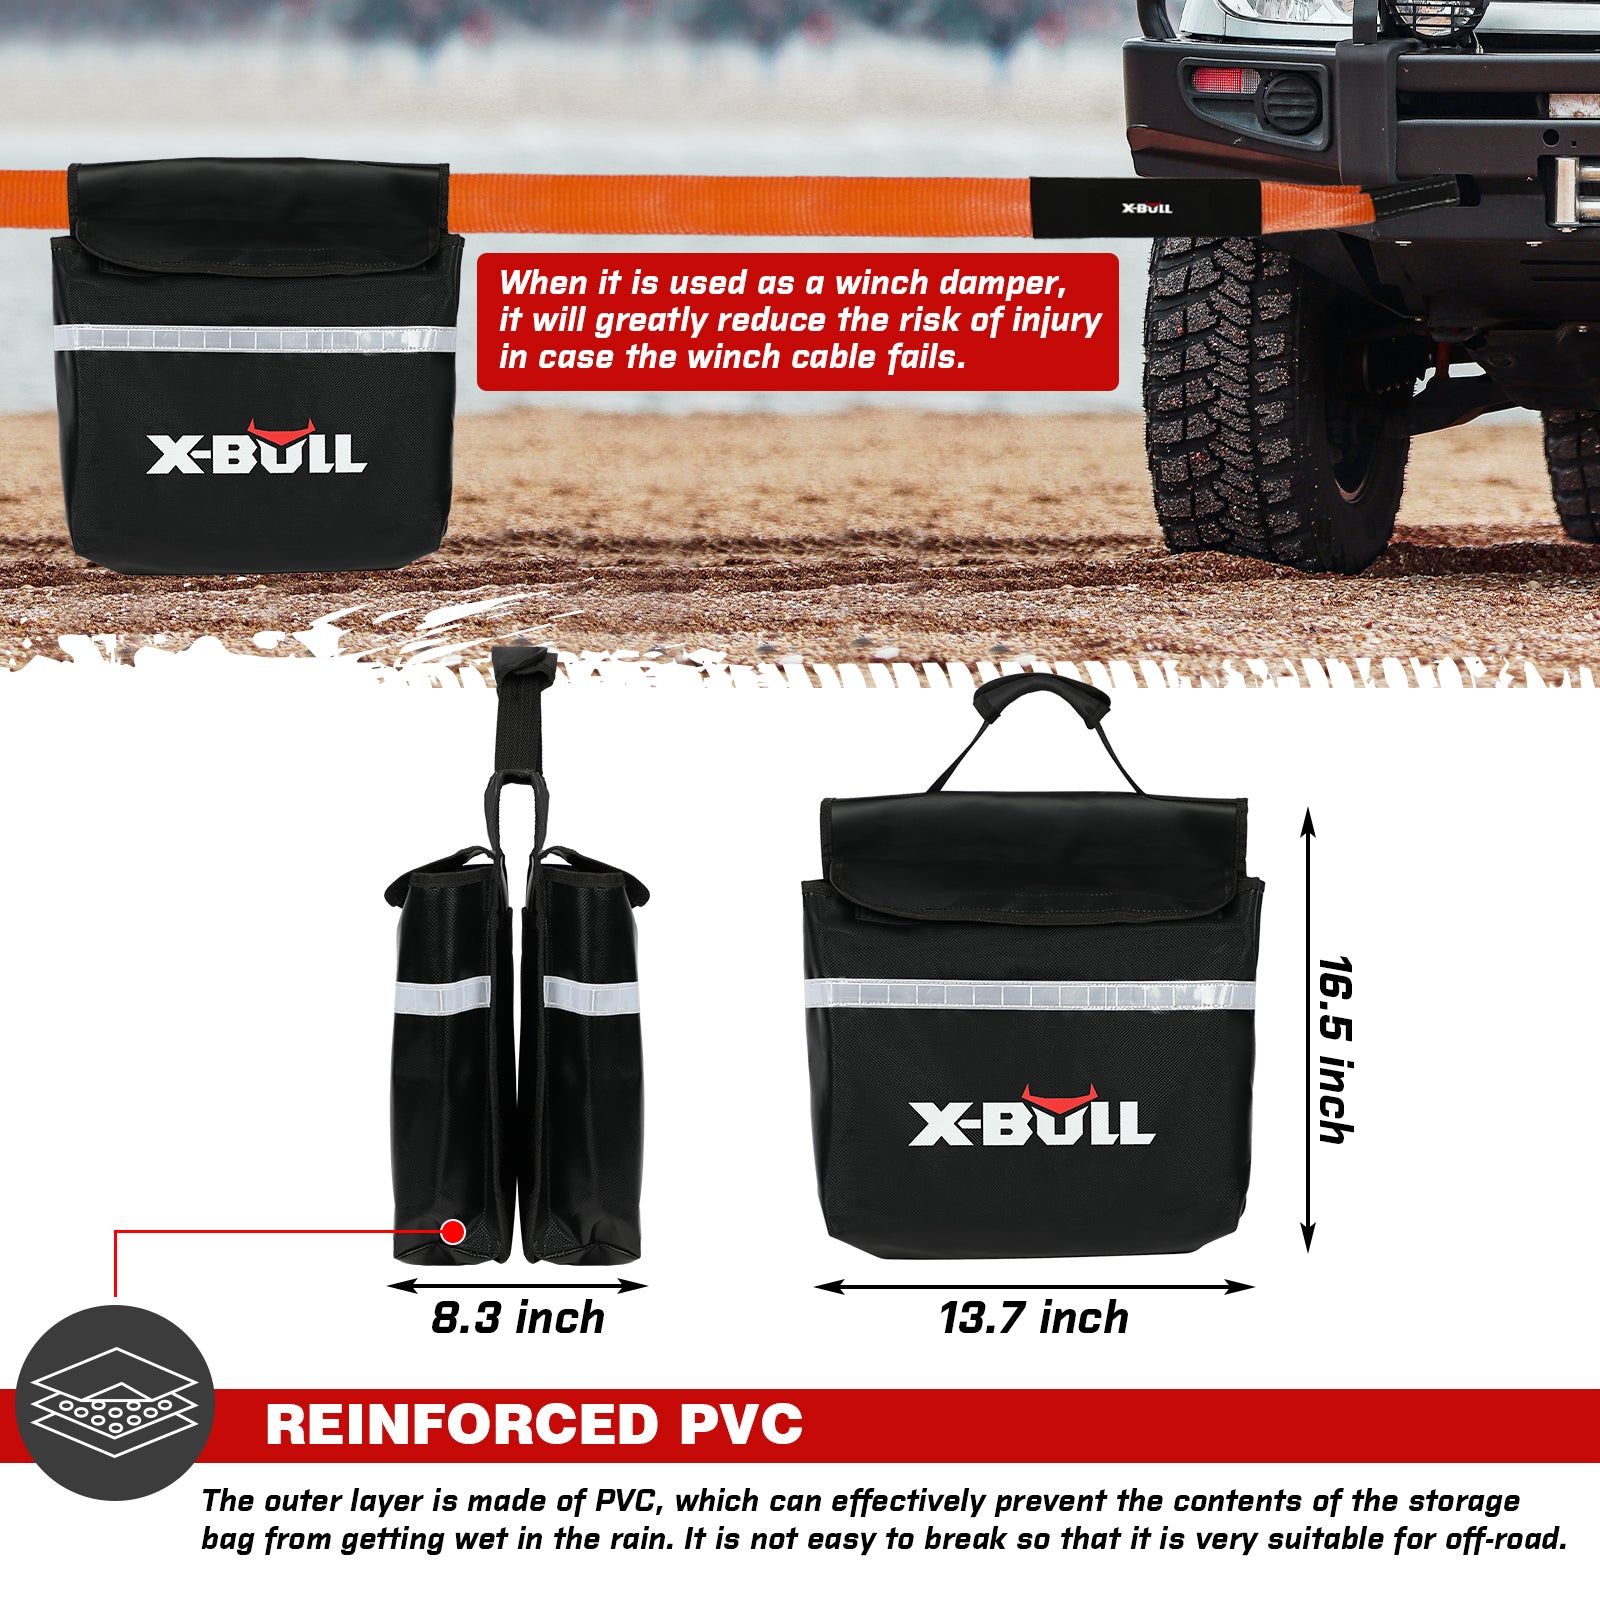 Complete 4WD Recovery Kit with Soft Shackles, Tracks - XBULL